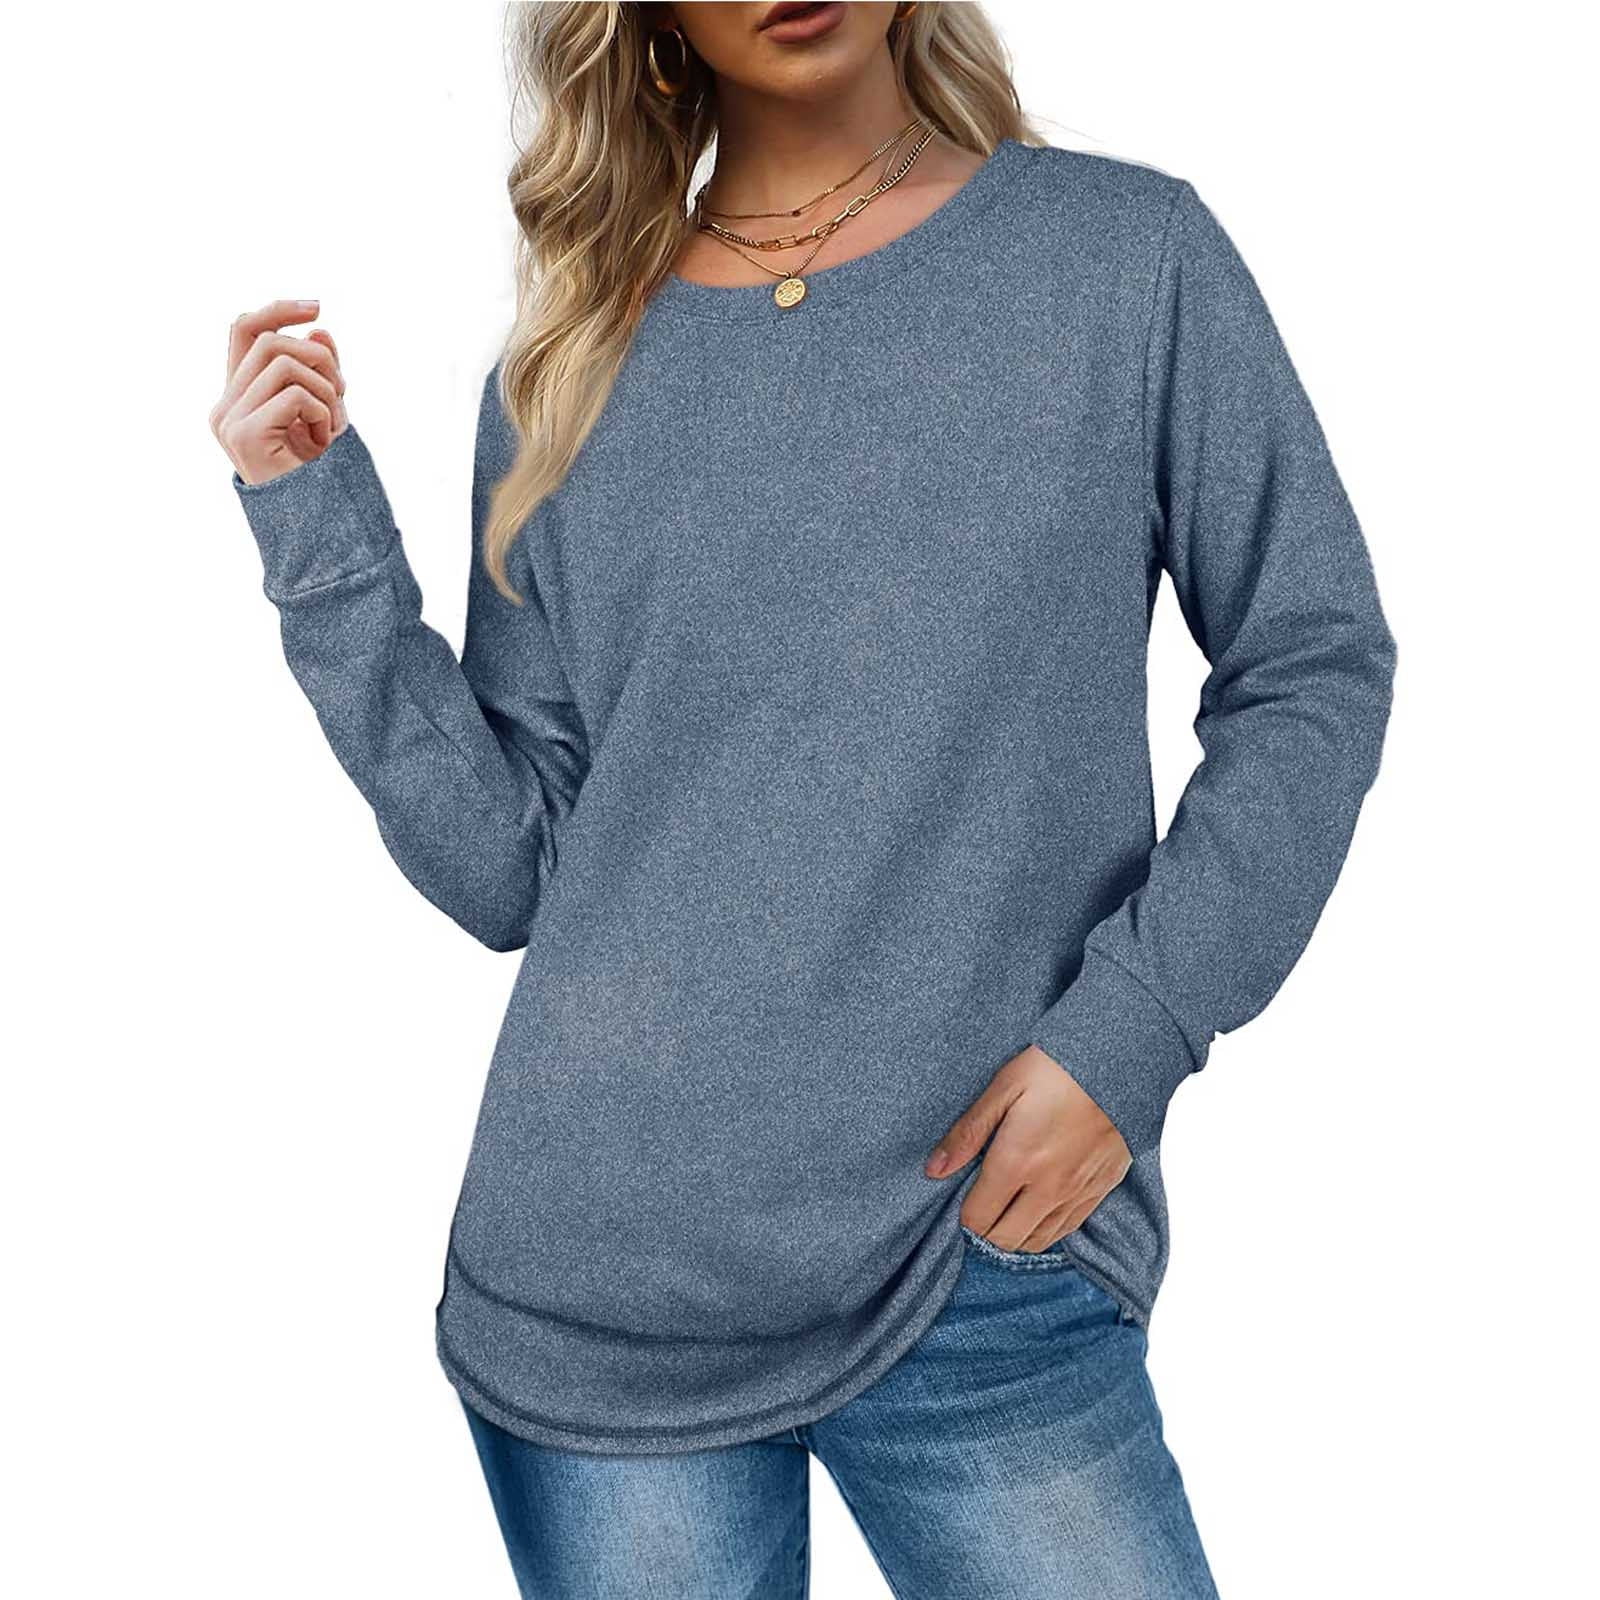 Levmjia Clearance Promotion Fall Winter Women Solid Long Sleeves Casual ...